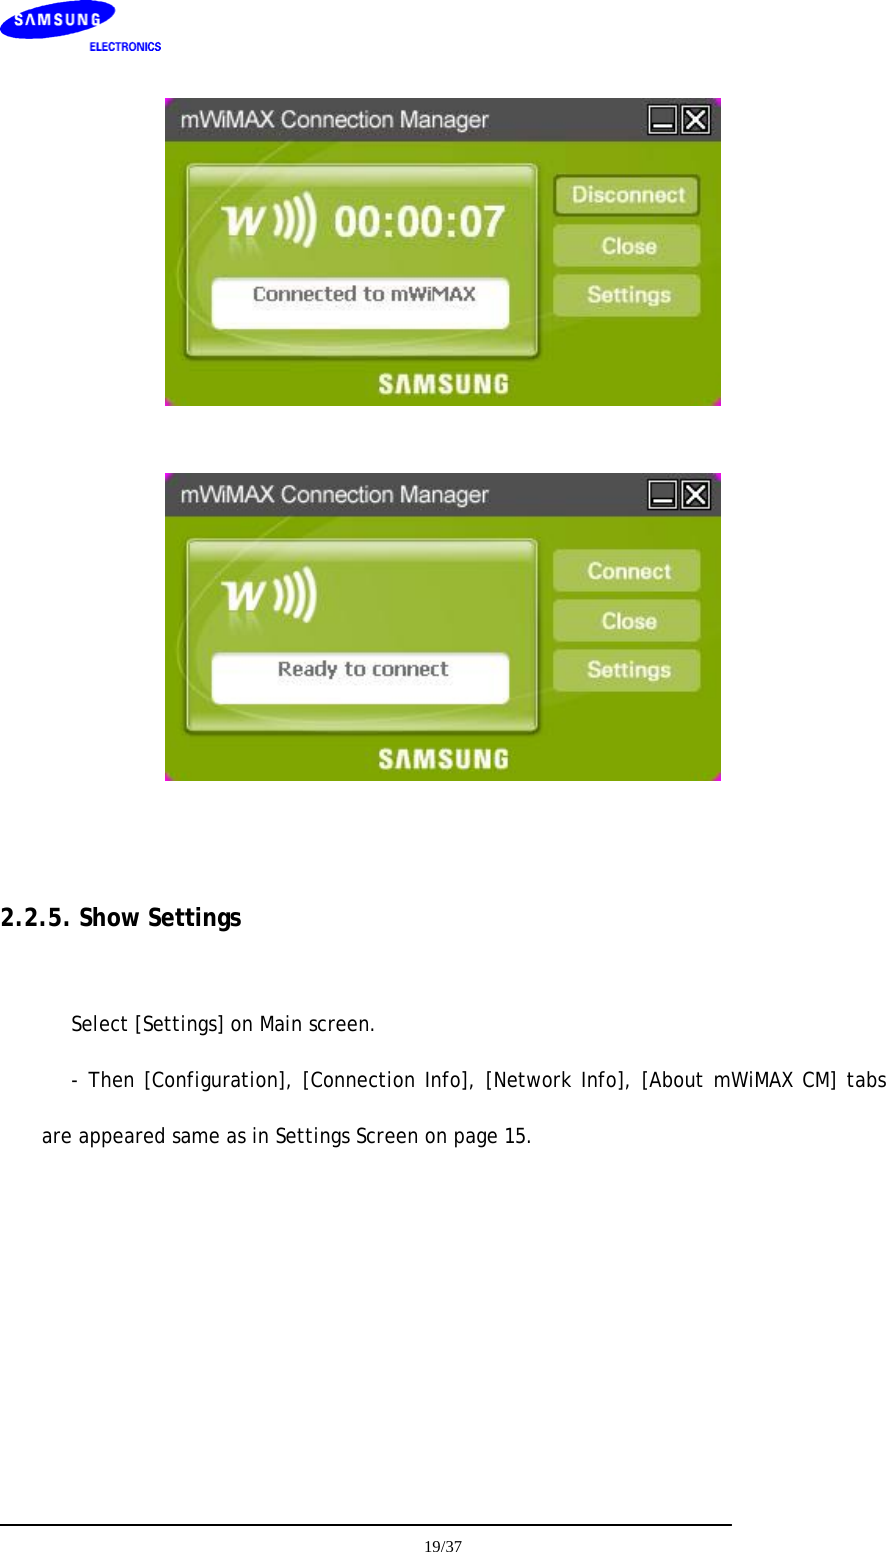         2.2.5. Show Settings  Select [Settings] on Main screen. - Then [Configuration], [Connection Info], [Network Info], [About mWiMAX CM] tabs are appeared same as in Settings Screen on page 15.   19/37  